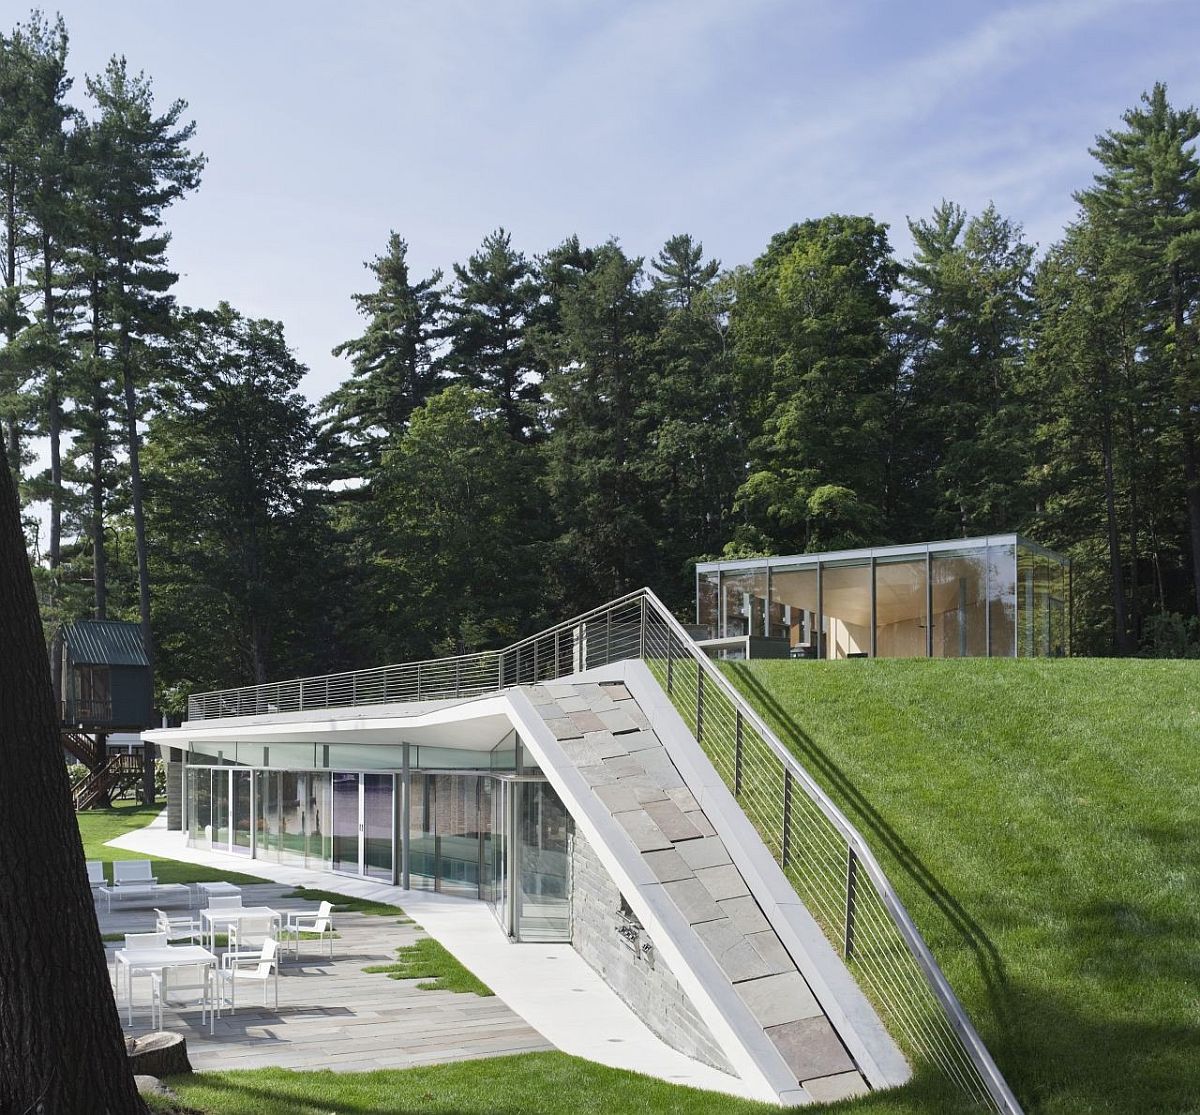 Green-roof-and-contours-of-the-pavilion-ensure-it-feels-like-a-natural-addition